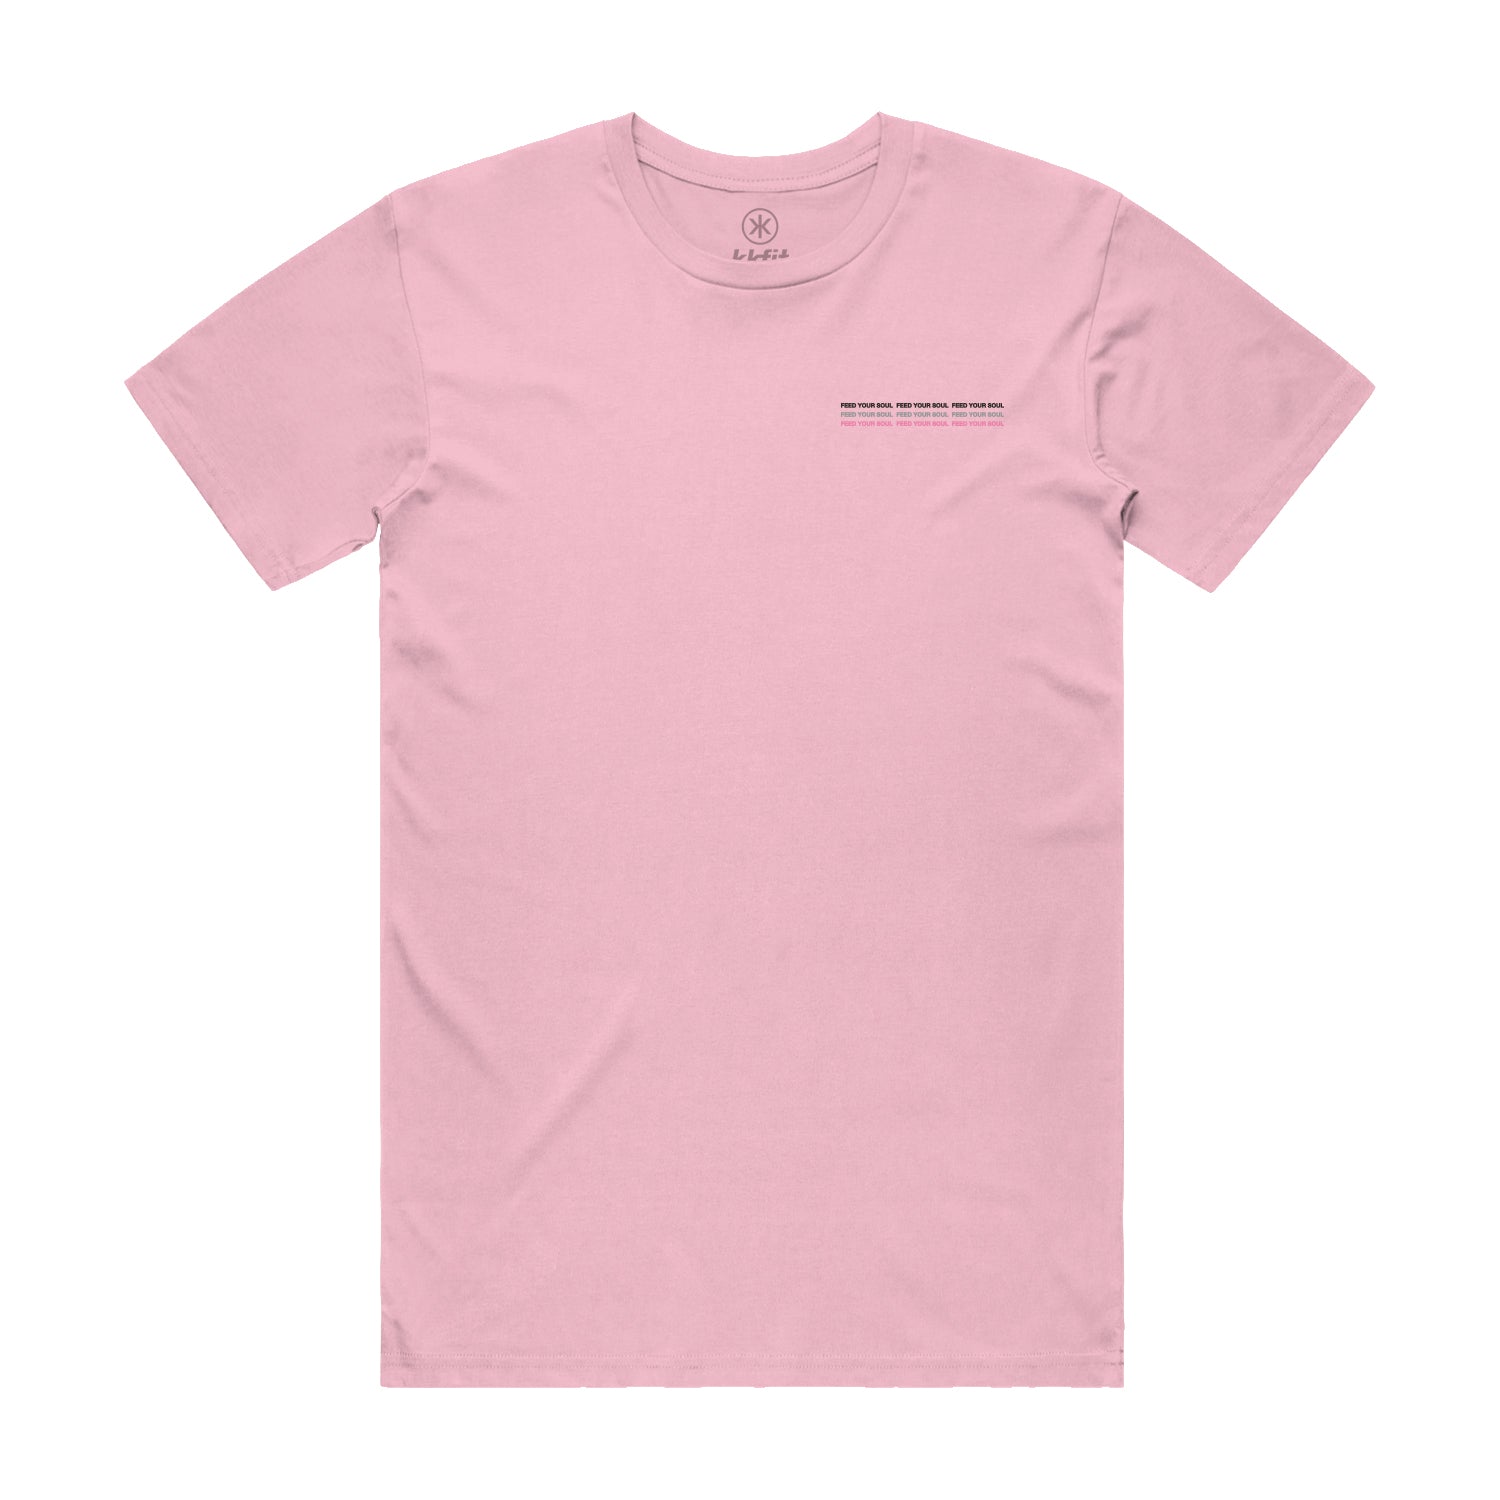 Tshirt - Pink Feed Your Soul